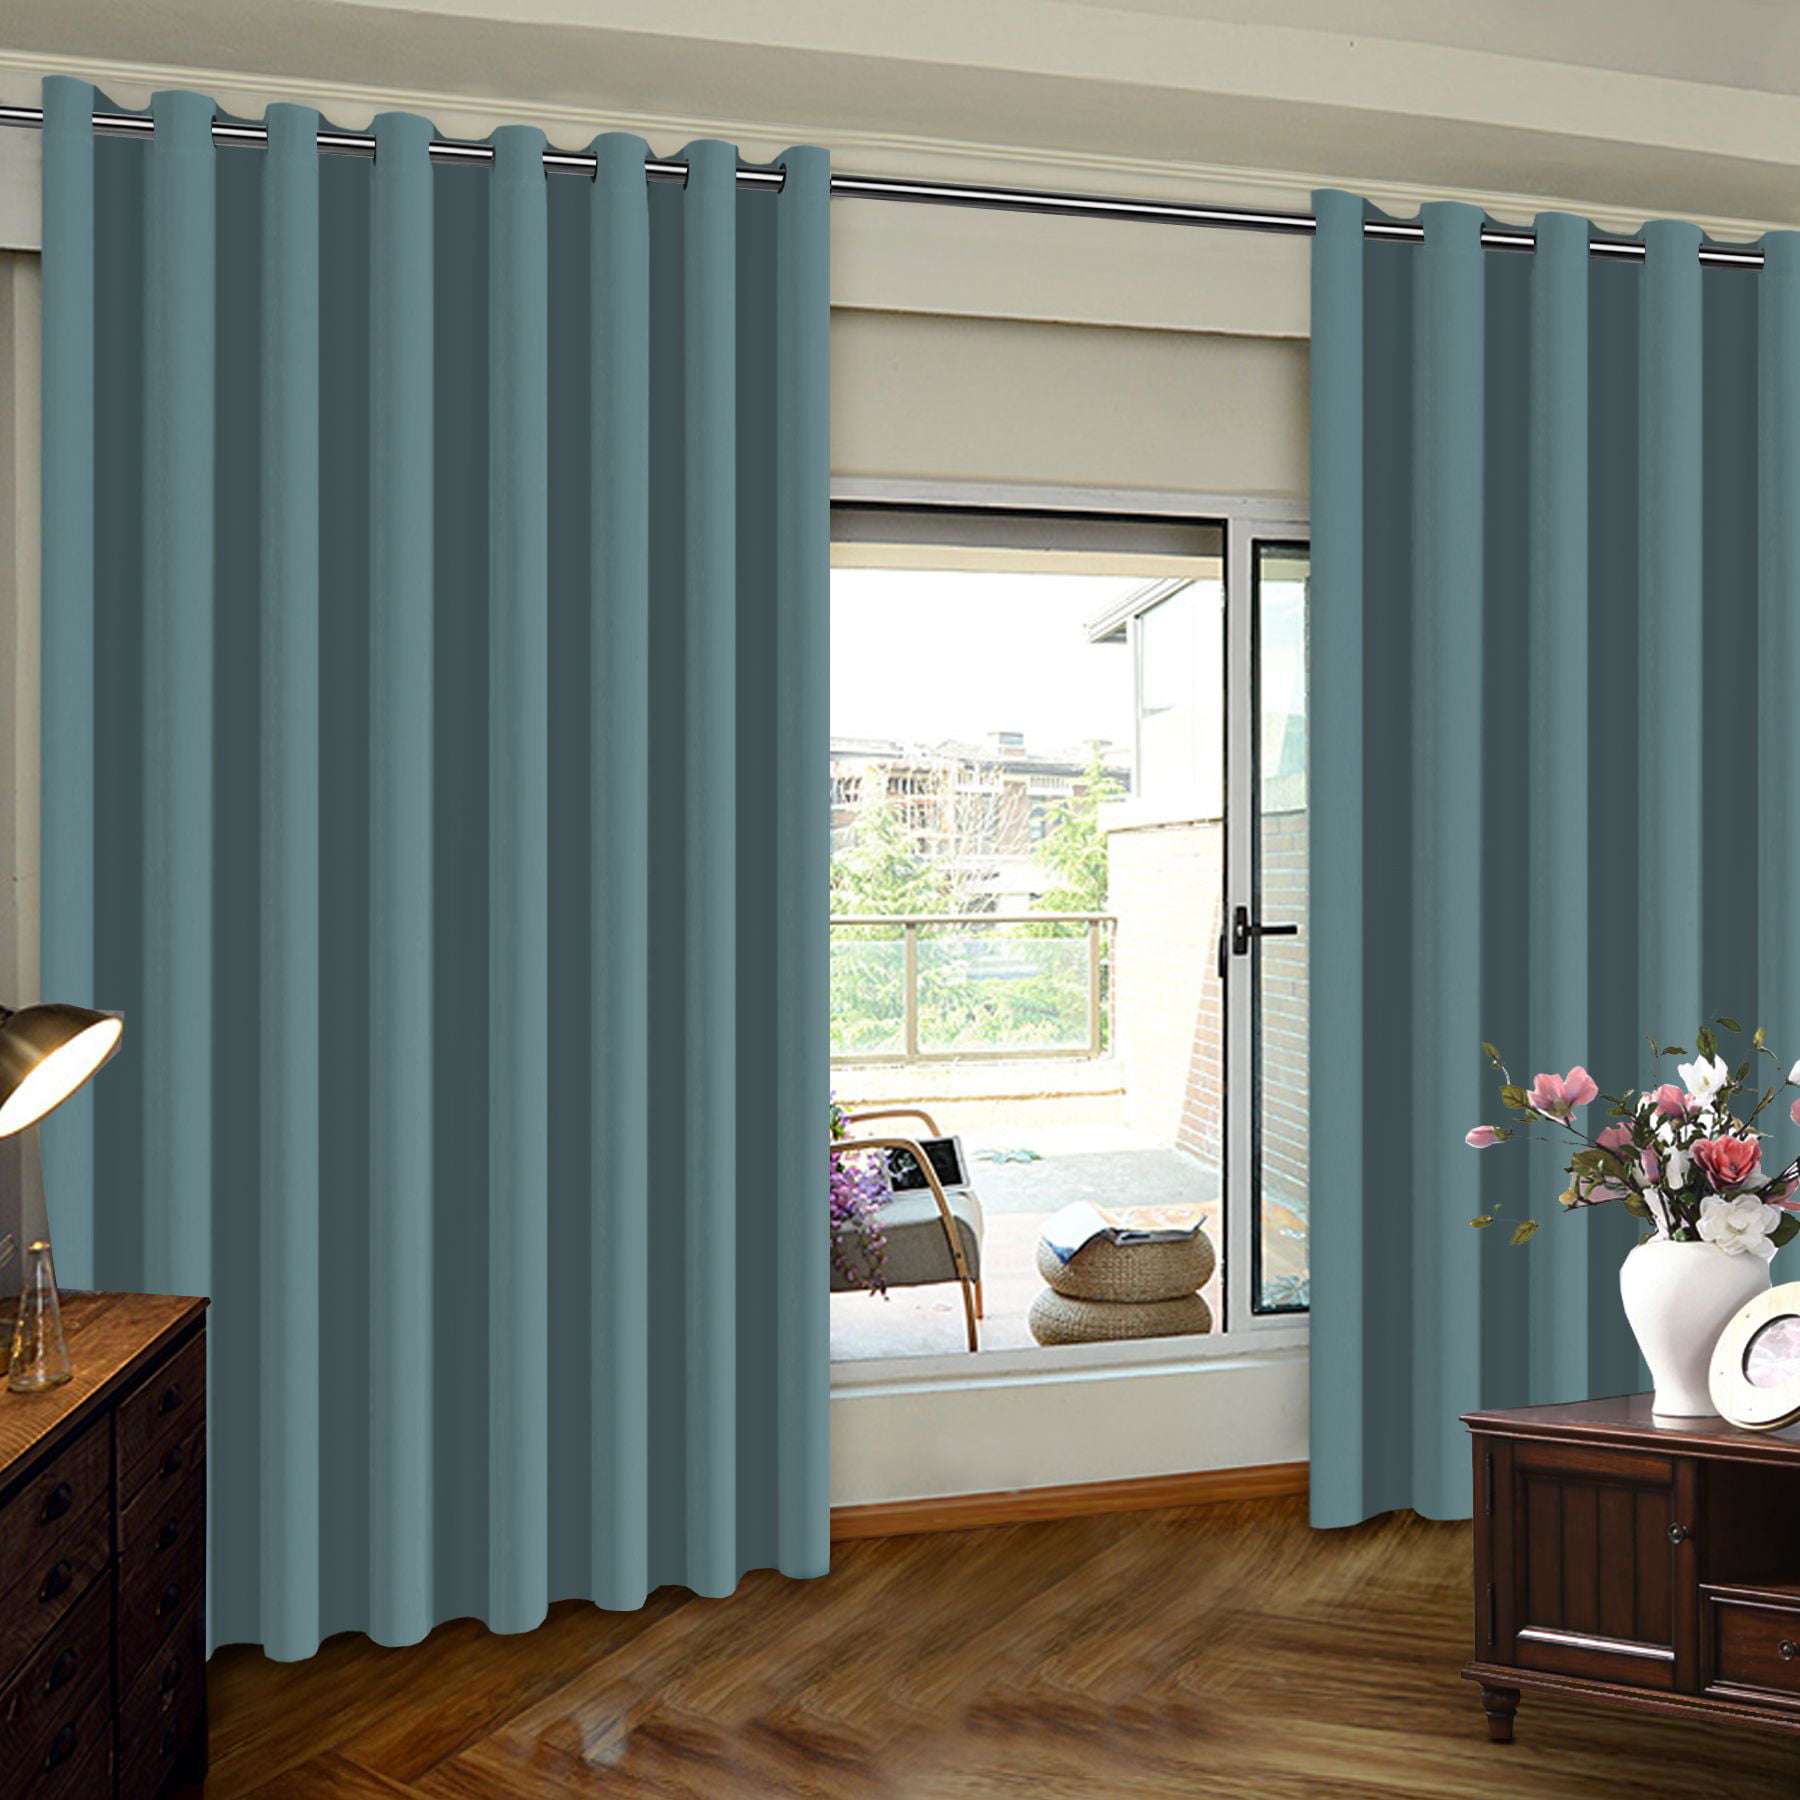 Patio Door Slider Curtains Extra Wide, What Curtains For Patio Doors